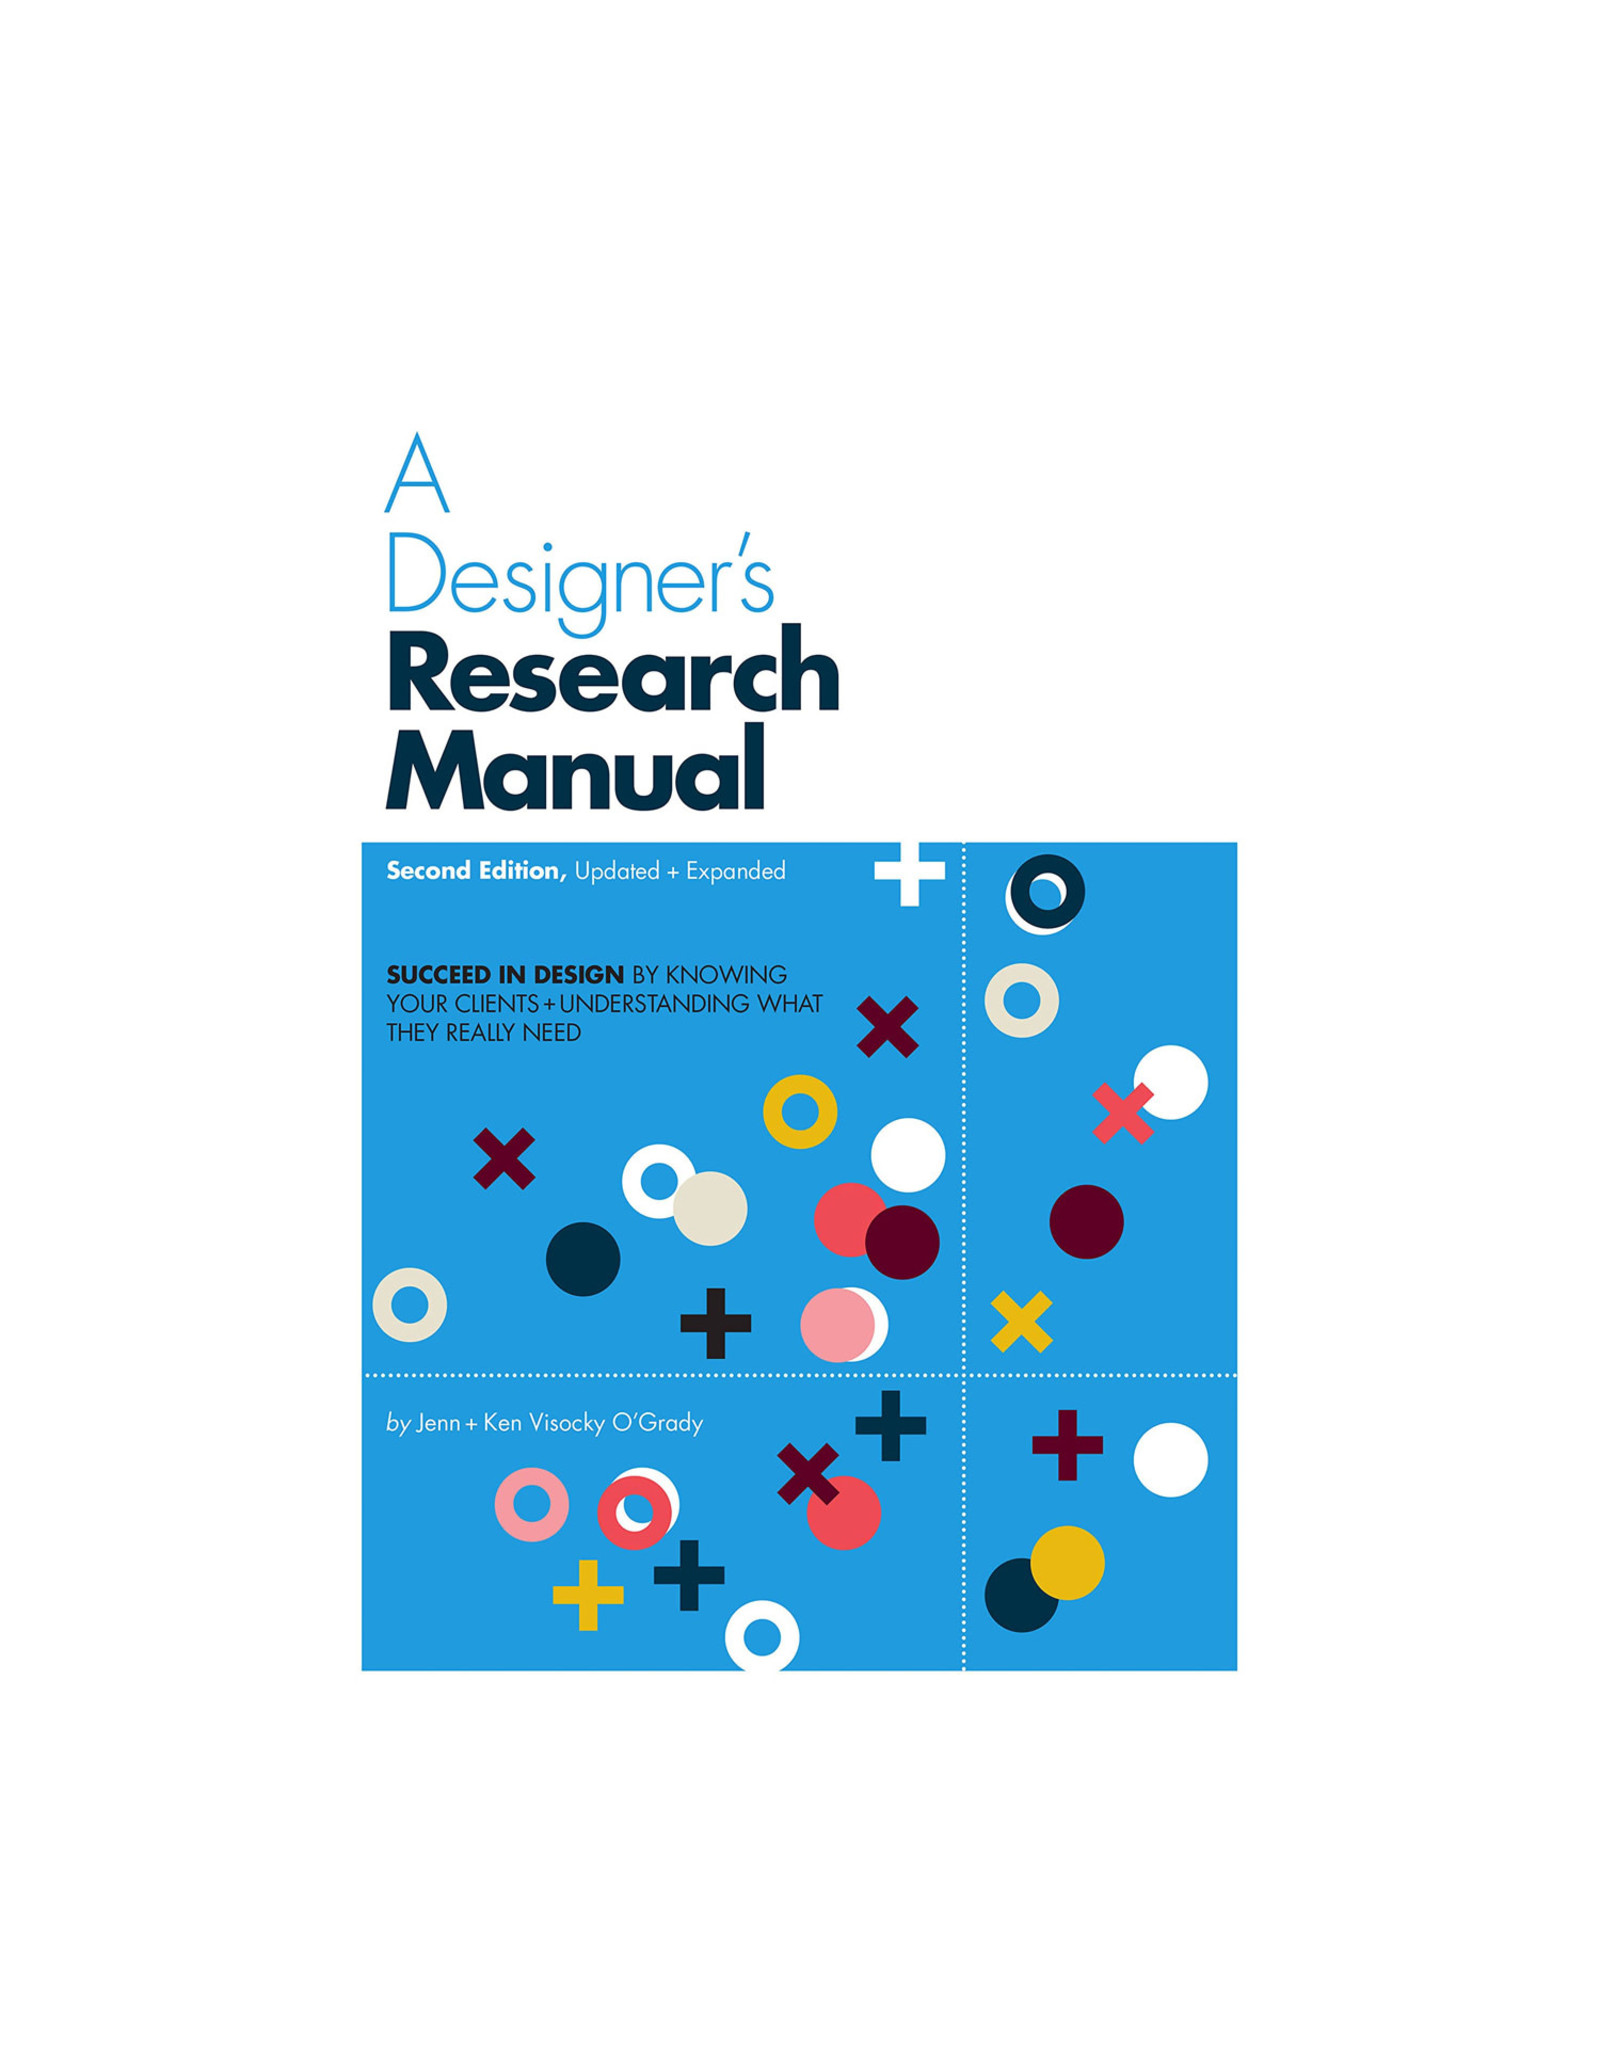 Designer's Research Manual, 2nd edition, Updated and Expanded: Succeed in design by knowing your clients and understanding what they really need